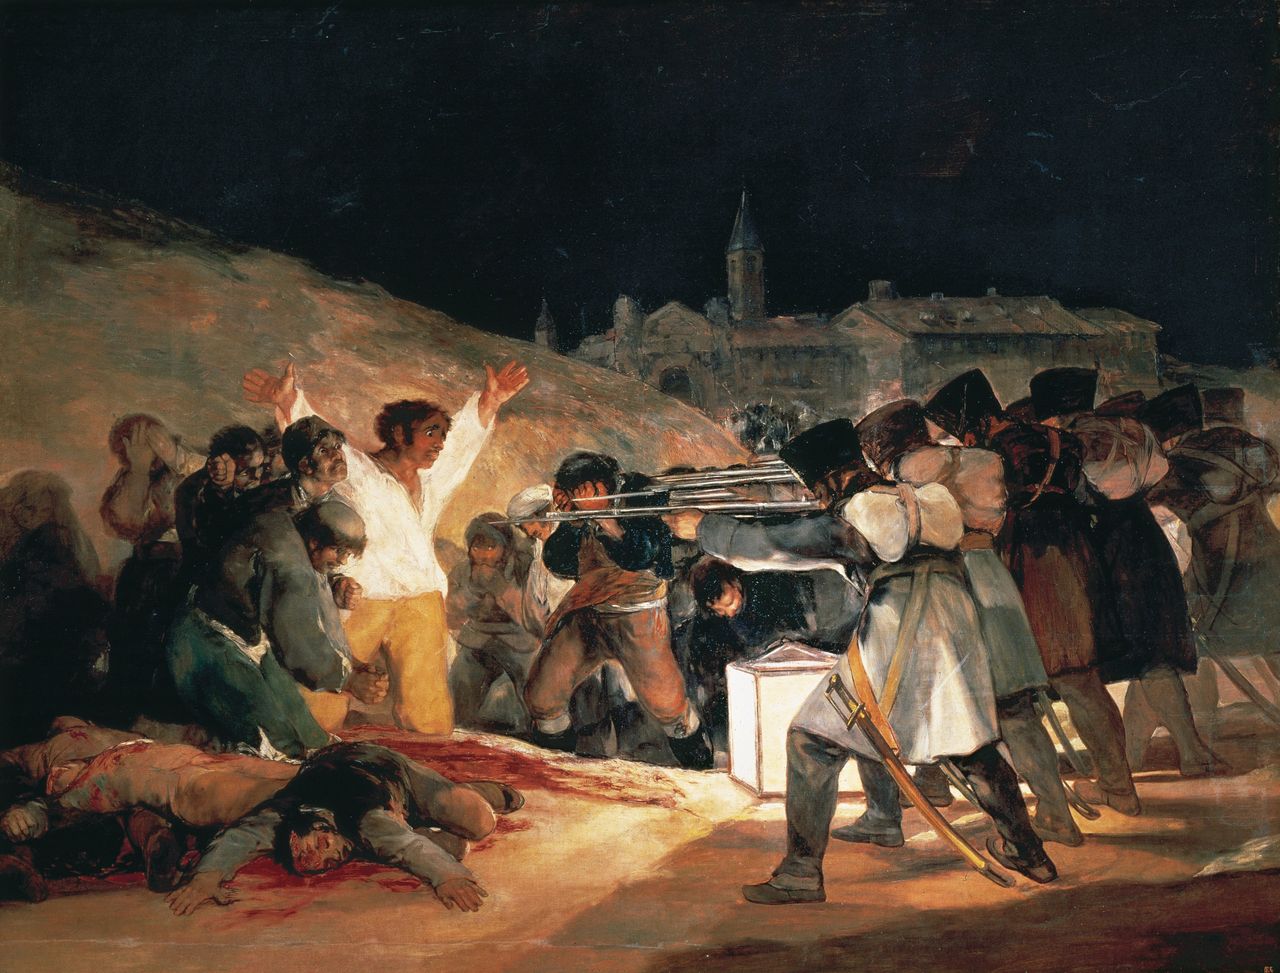 Francisco de Goya (1746-1828). Spanish romantic painter. The Third of May 1808. Oil on Canvas, 1814. Spanish resisters being executed by Napoleon's troops during the Peninsular War. Prado Museum. Madrid. Spain. (Photo by: Prisma/UIG via Getty Images)